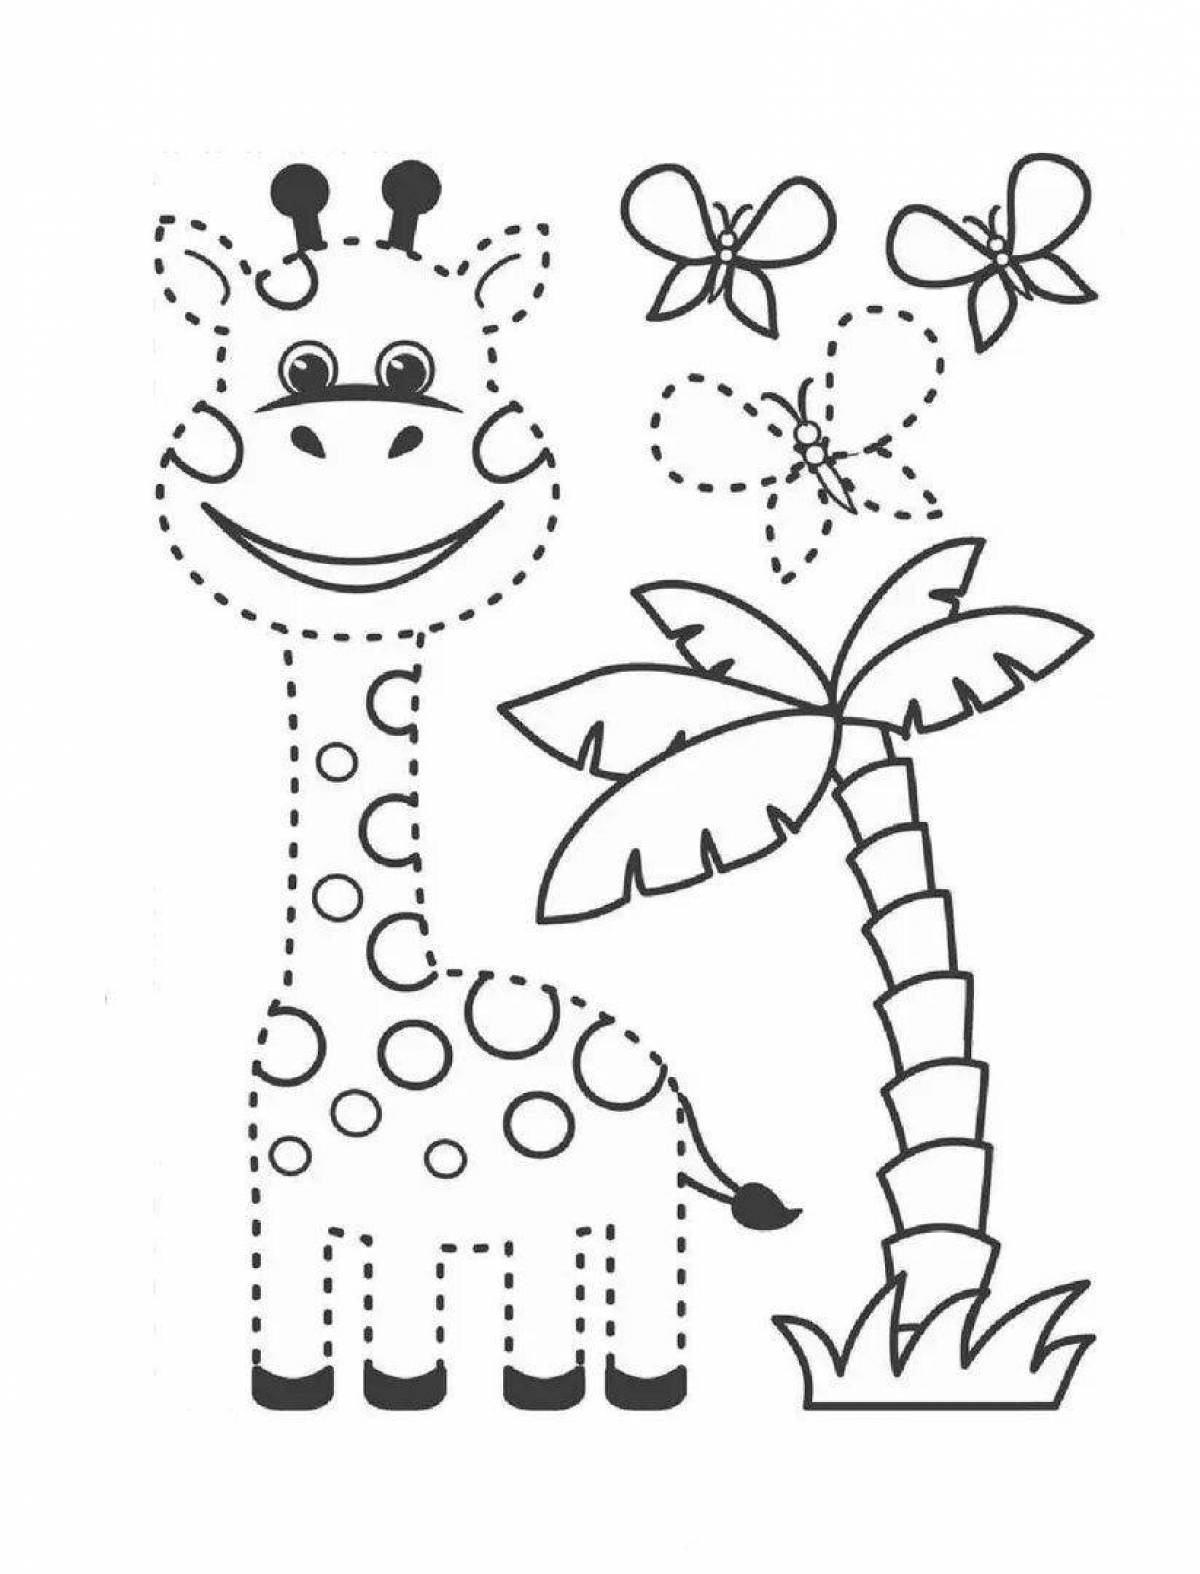 Colourful coloring pages for children 4-5 years old